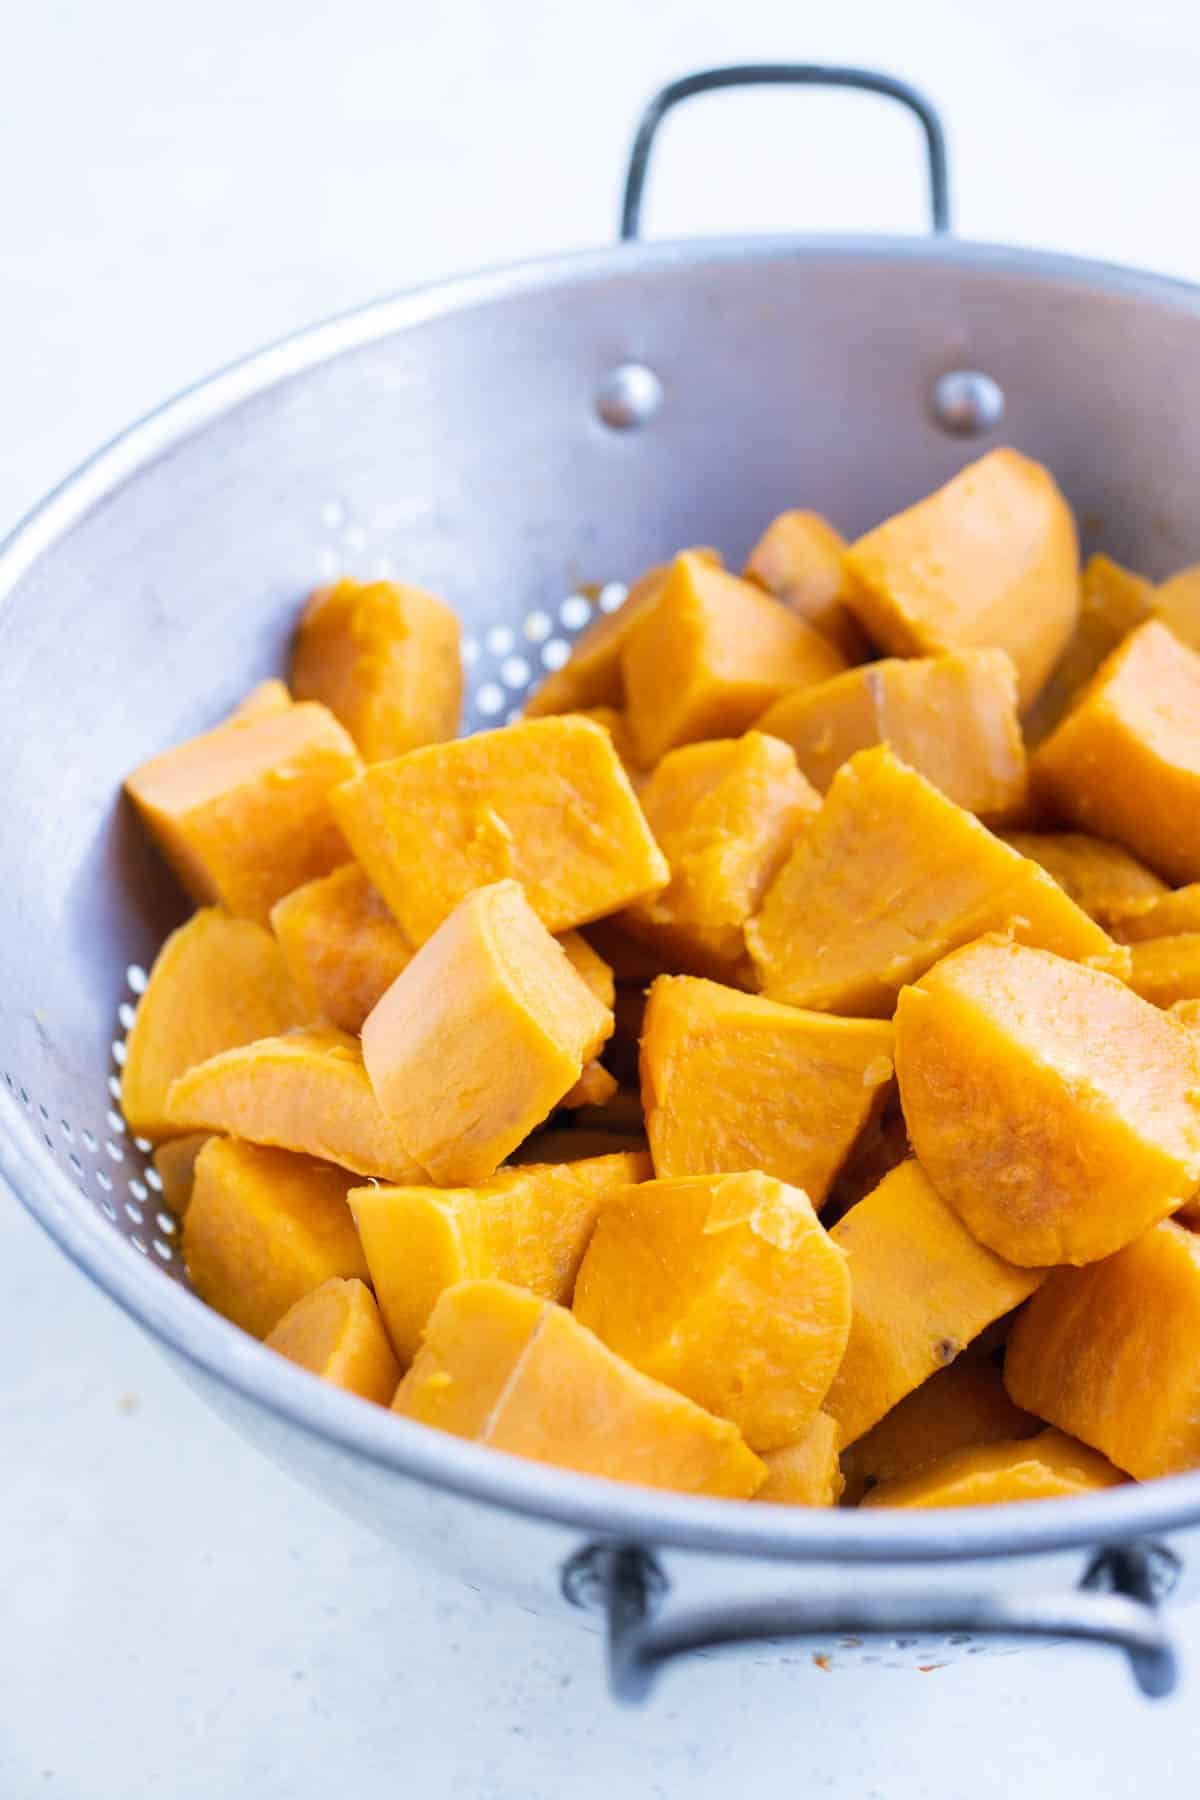 Sweet potatoes are drained in a colander after boiling.